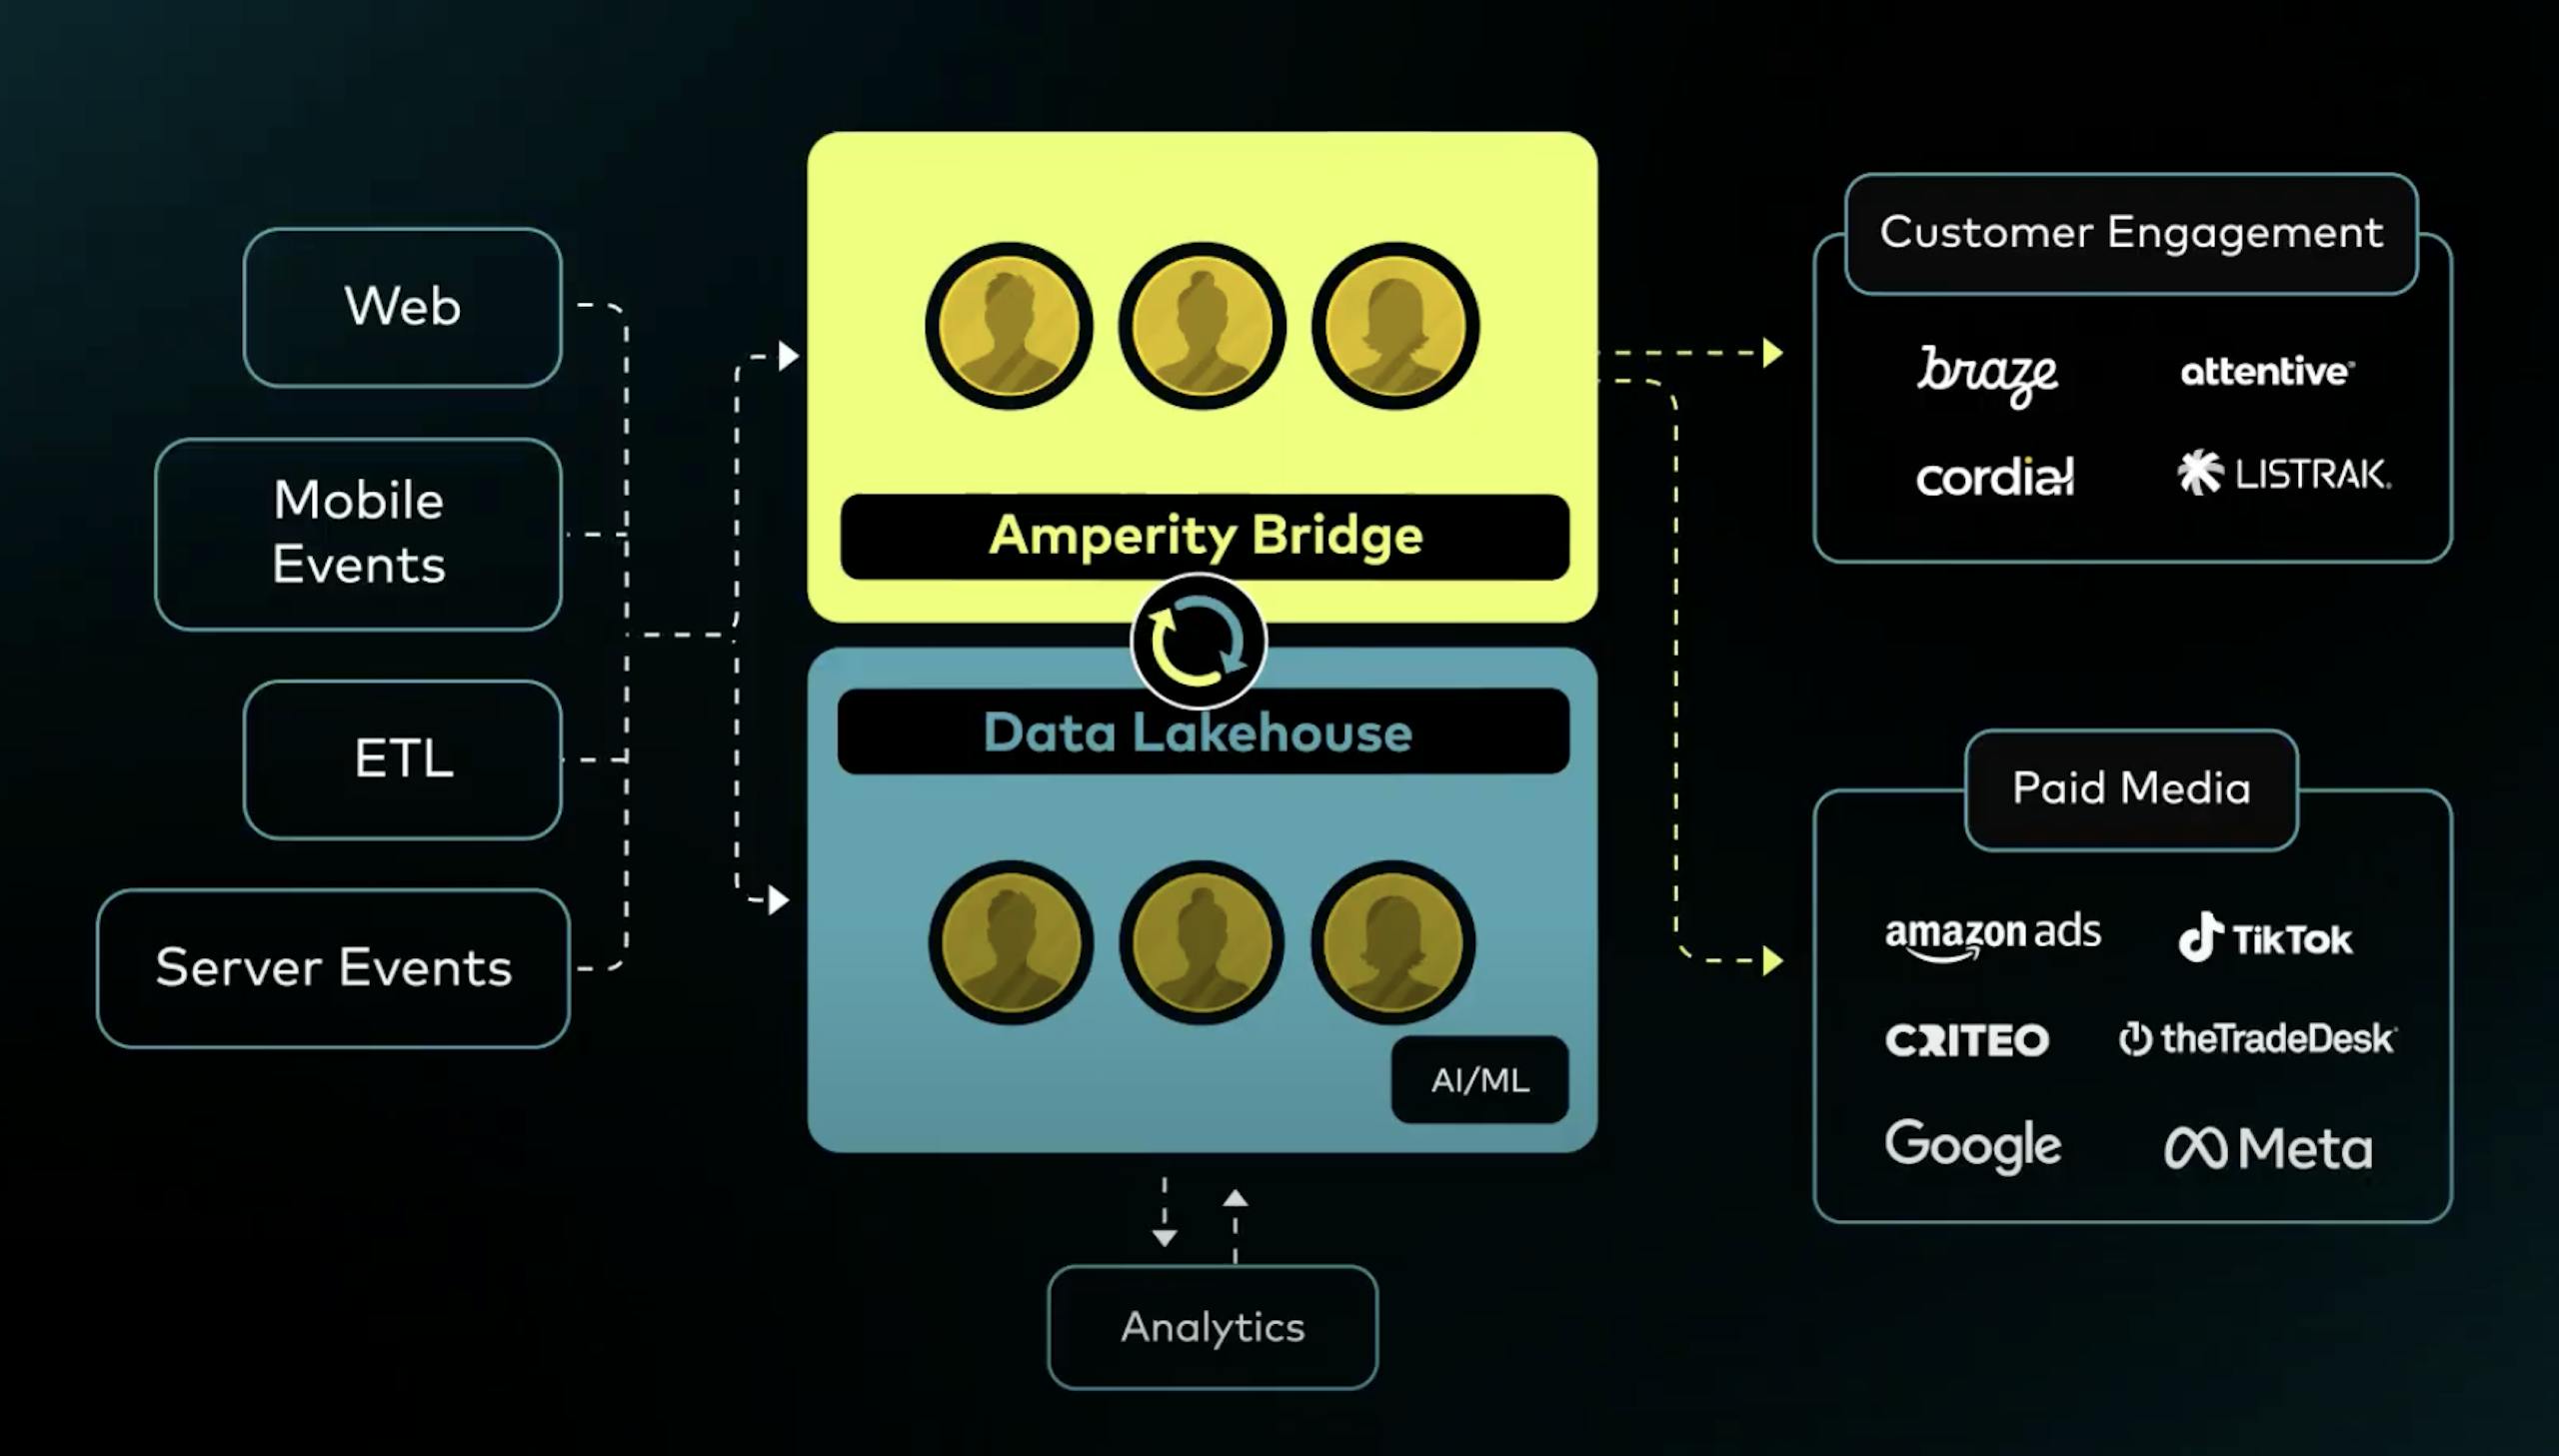 A data architecture diagram showing Amperity connected to a Data Lakehouse through the data sharing interface Amperity Bridge, with various sources sending customer data into Amperity and the Lakehouse from the left and various destinations where enriched data can go from Amperity and the Lakehouse on the right.